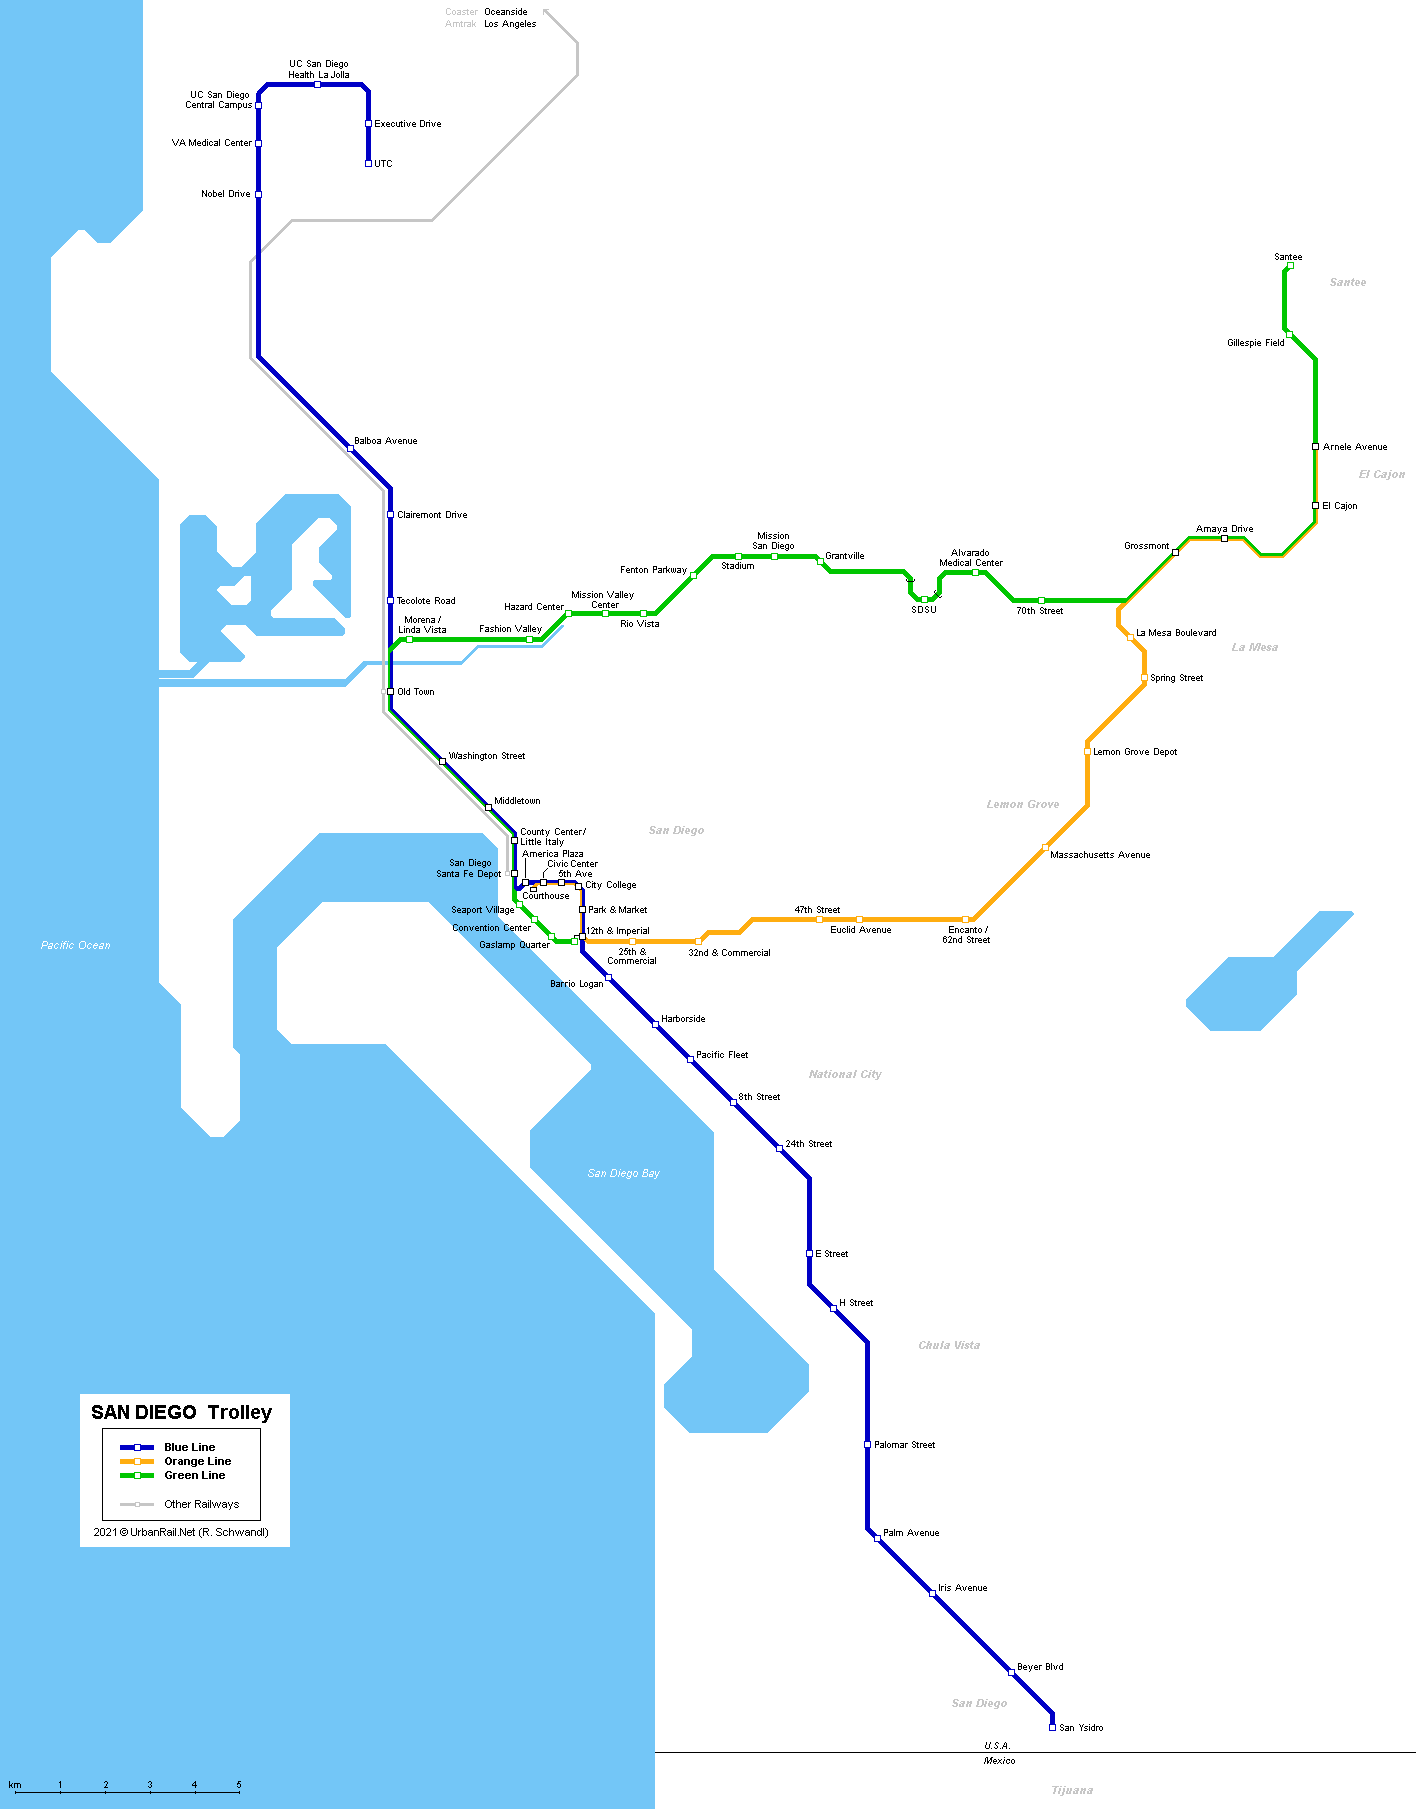 San Diego Trolley System Map (Click to expand) © Robert Schwandl